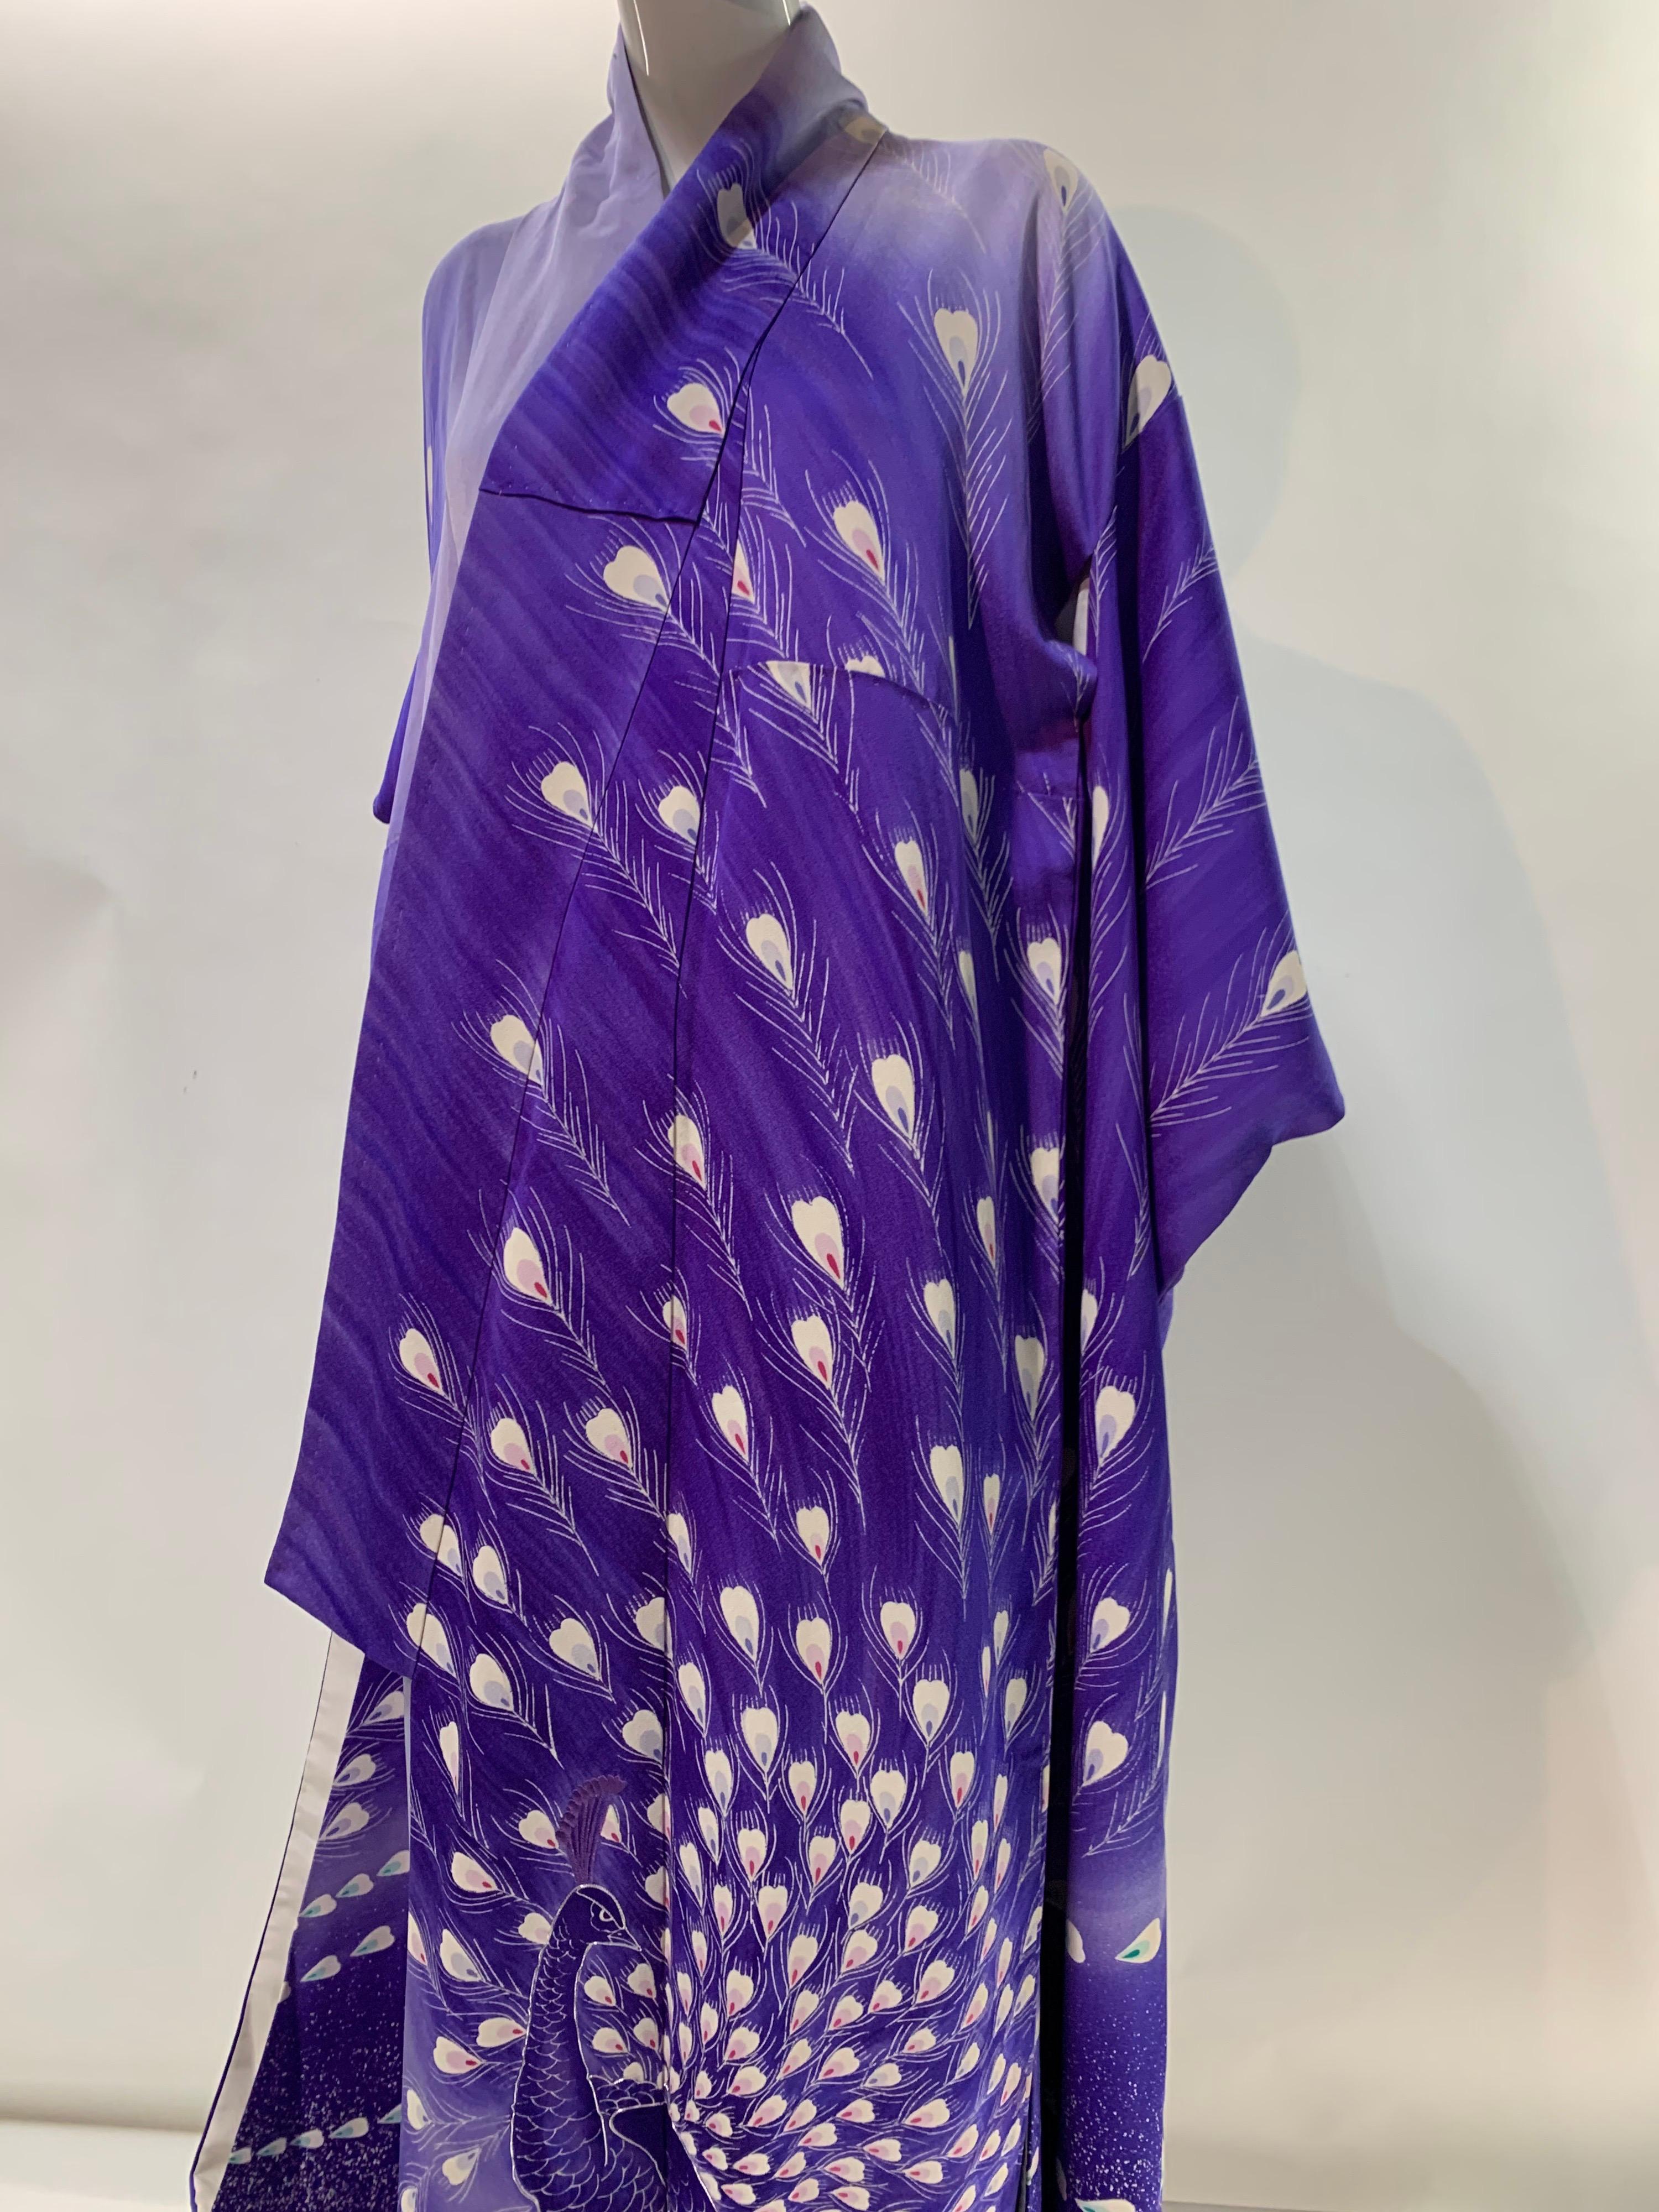 1940 Pristine Purple Ombré Silk Kimono W/ Dramatic Hand Painted Peacock Motif. Full length. Lined in gray/blue ombre silk. Size Medium.